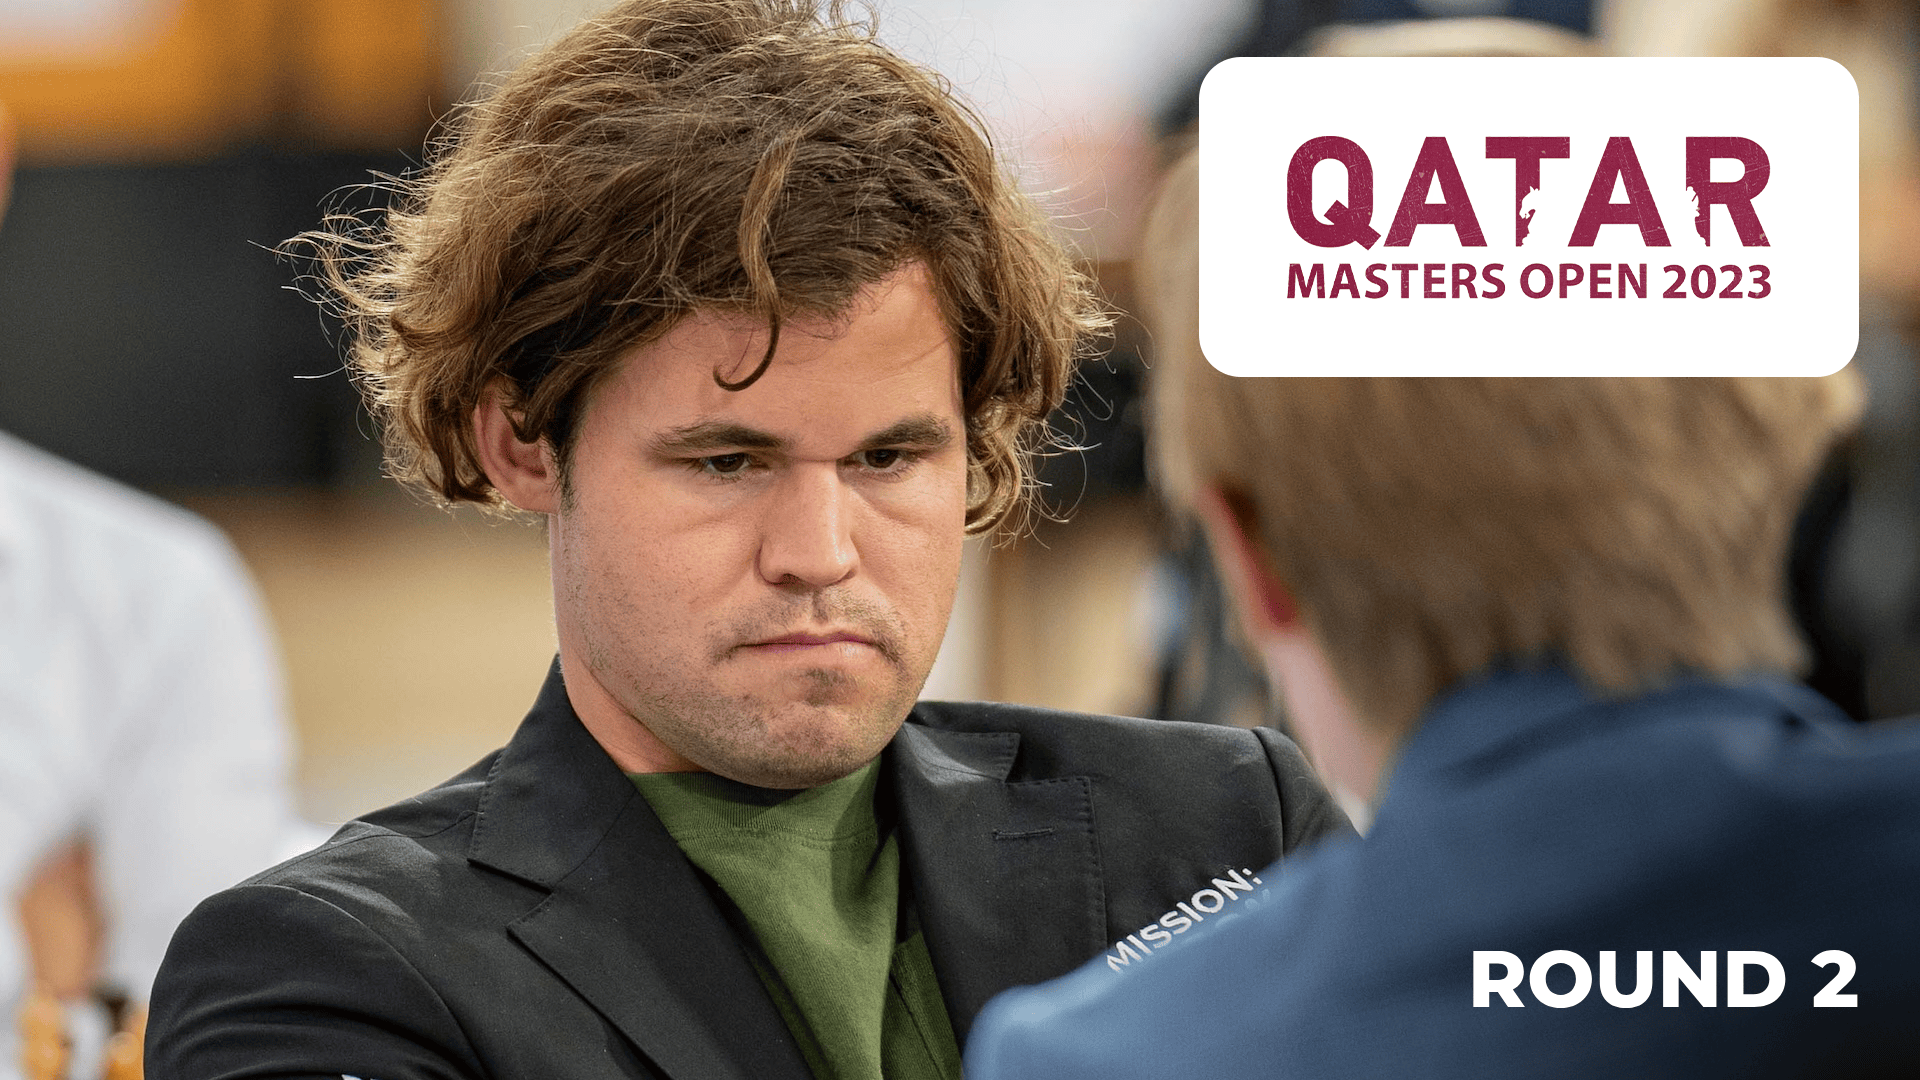 Norway Chess on X: GM Alisher Suleymenov played a Paul Morphy level game  yesterday against World #1 Magnus Carlsen in Round 2 of the  #QatarMasters2023, who suffered his worst loss in rating